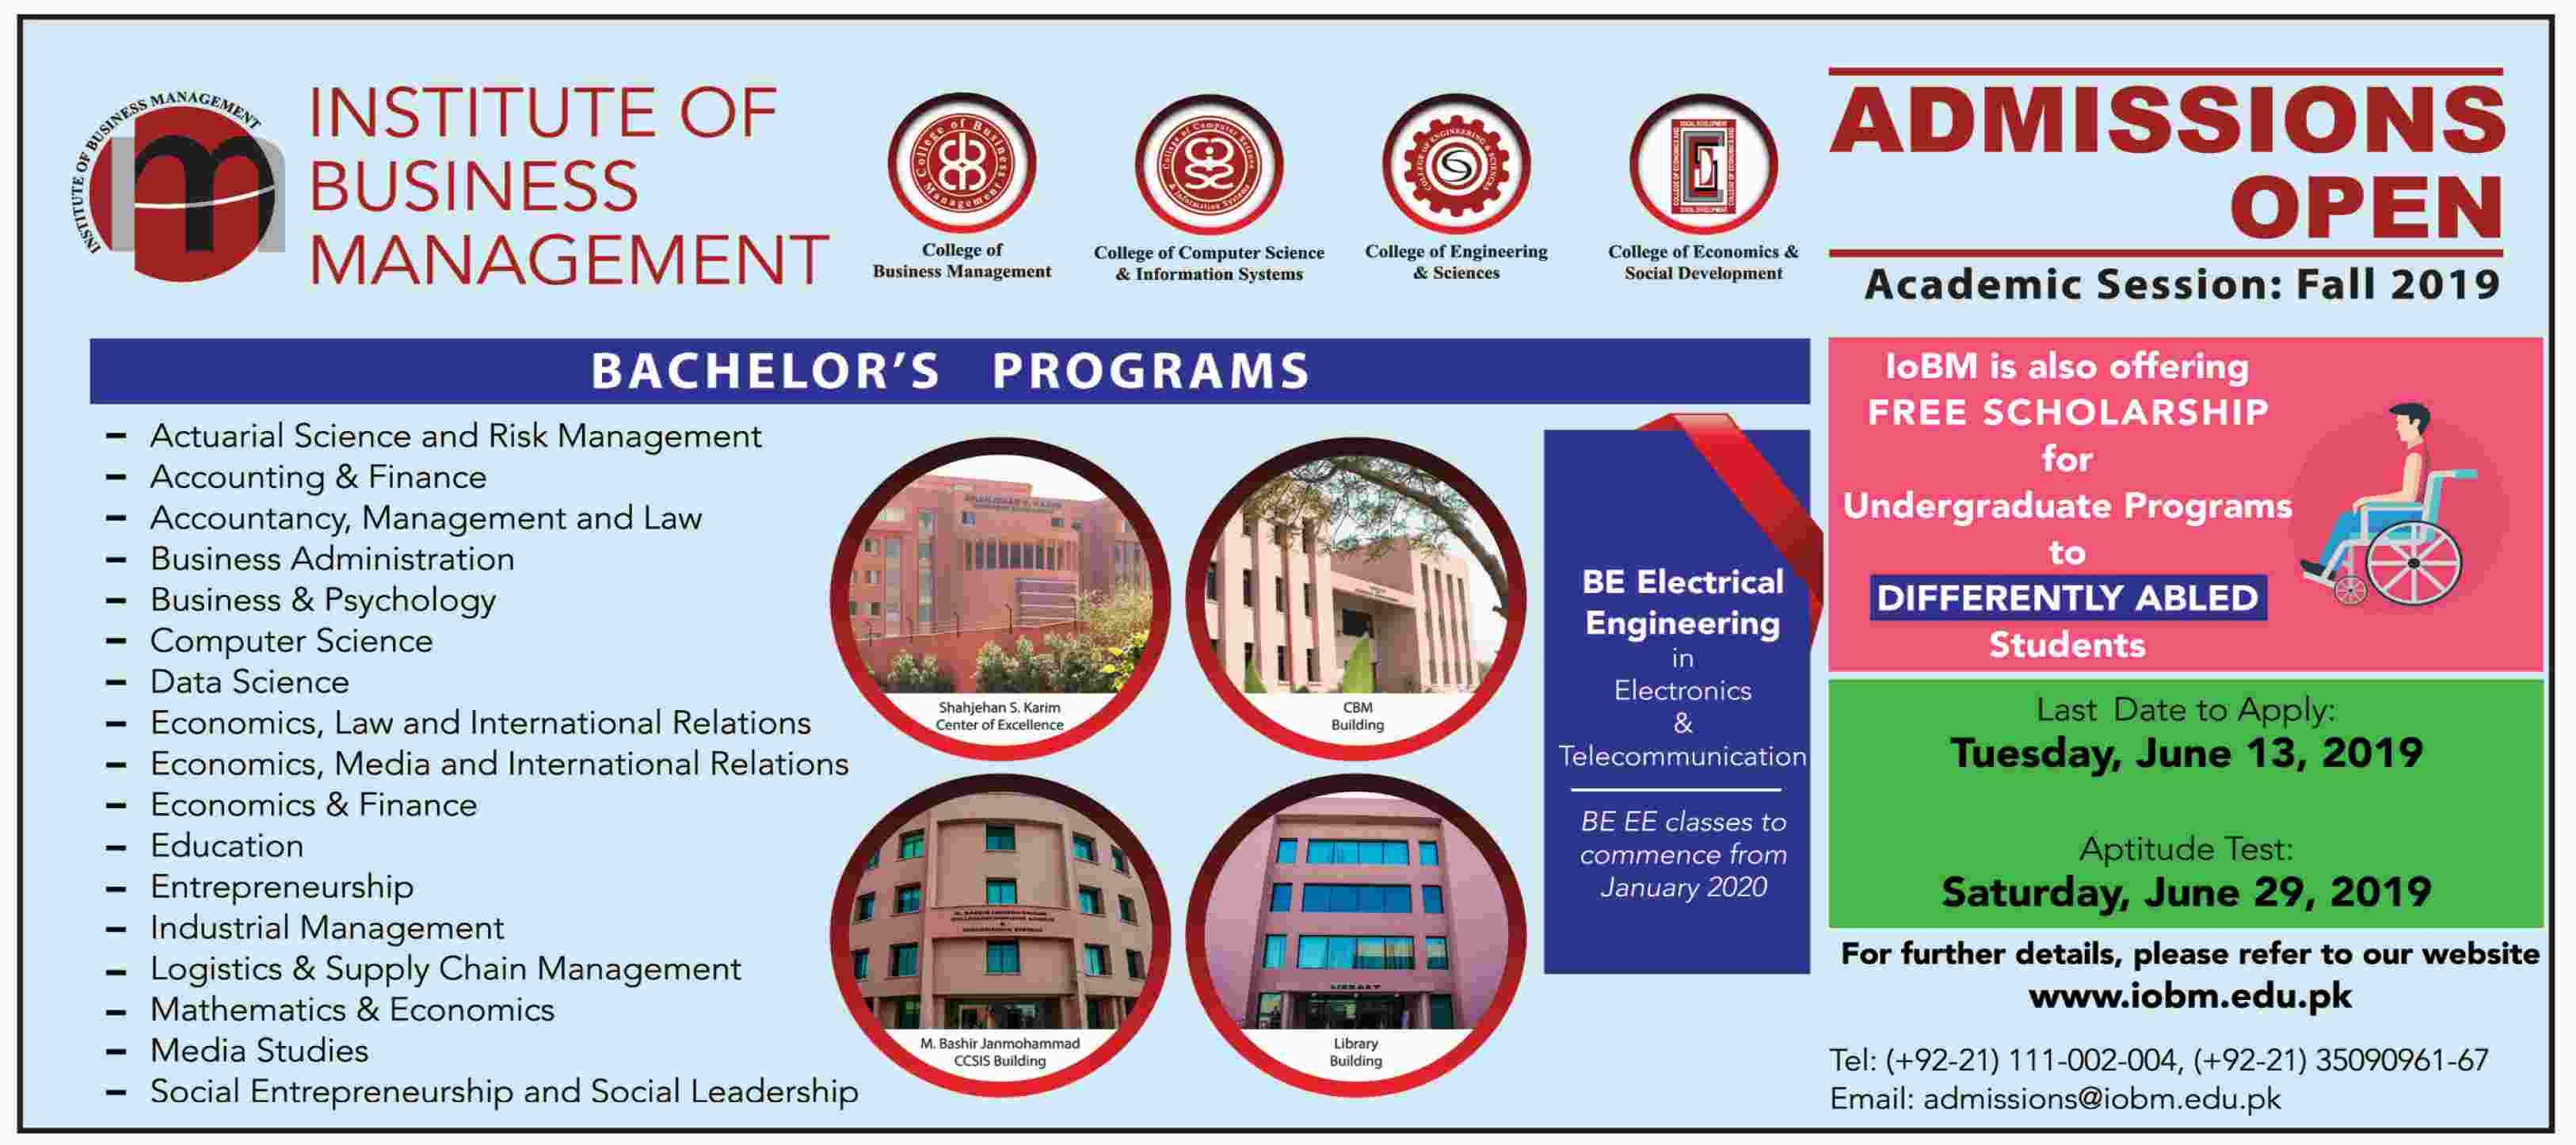 Institute Of Business Management Admissions 2019 IOBM Fall